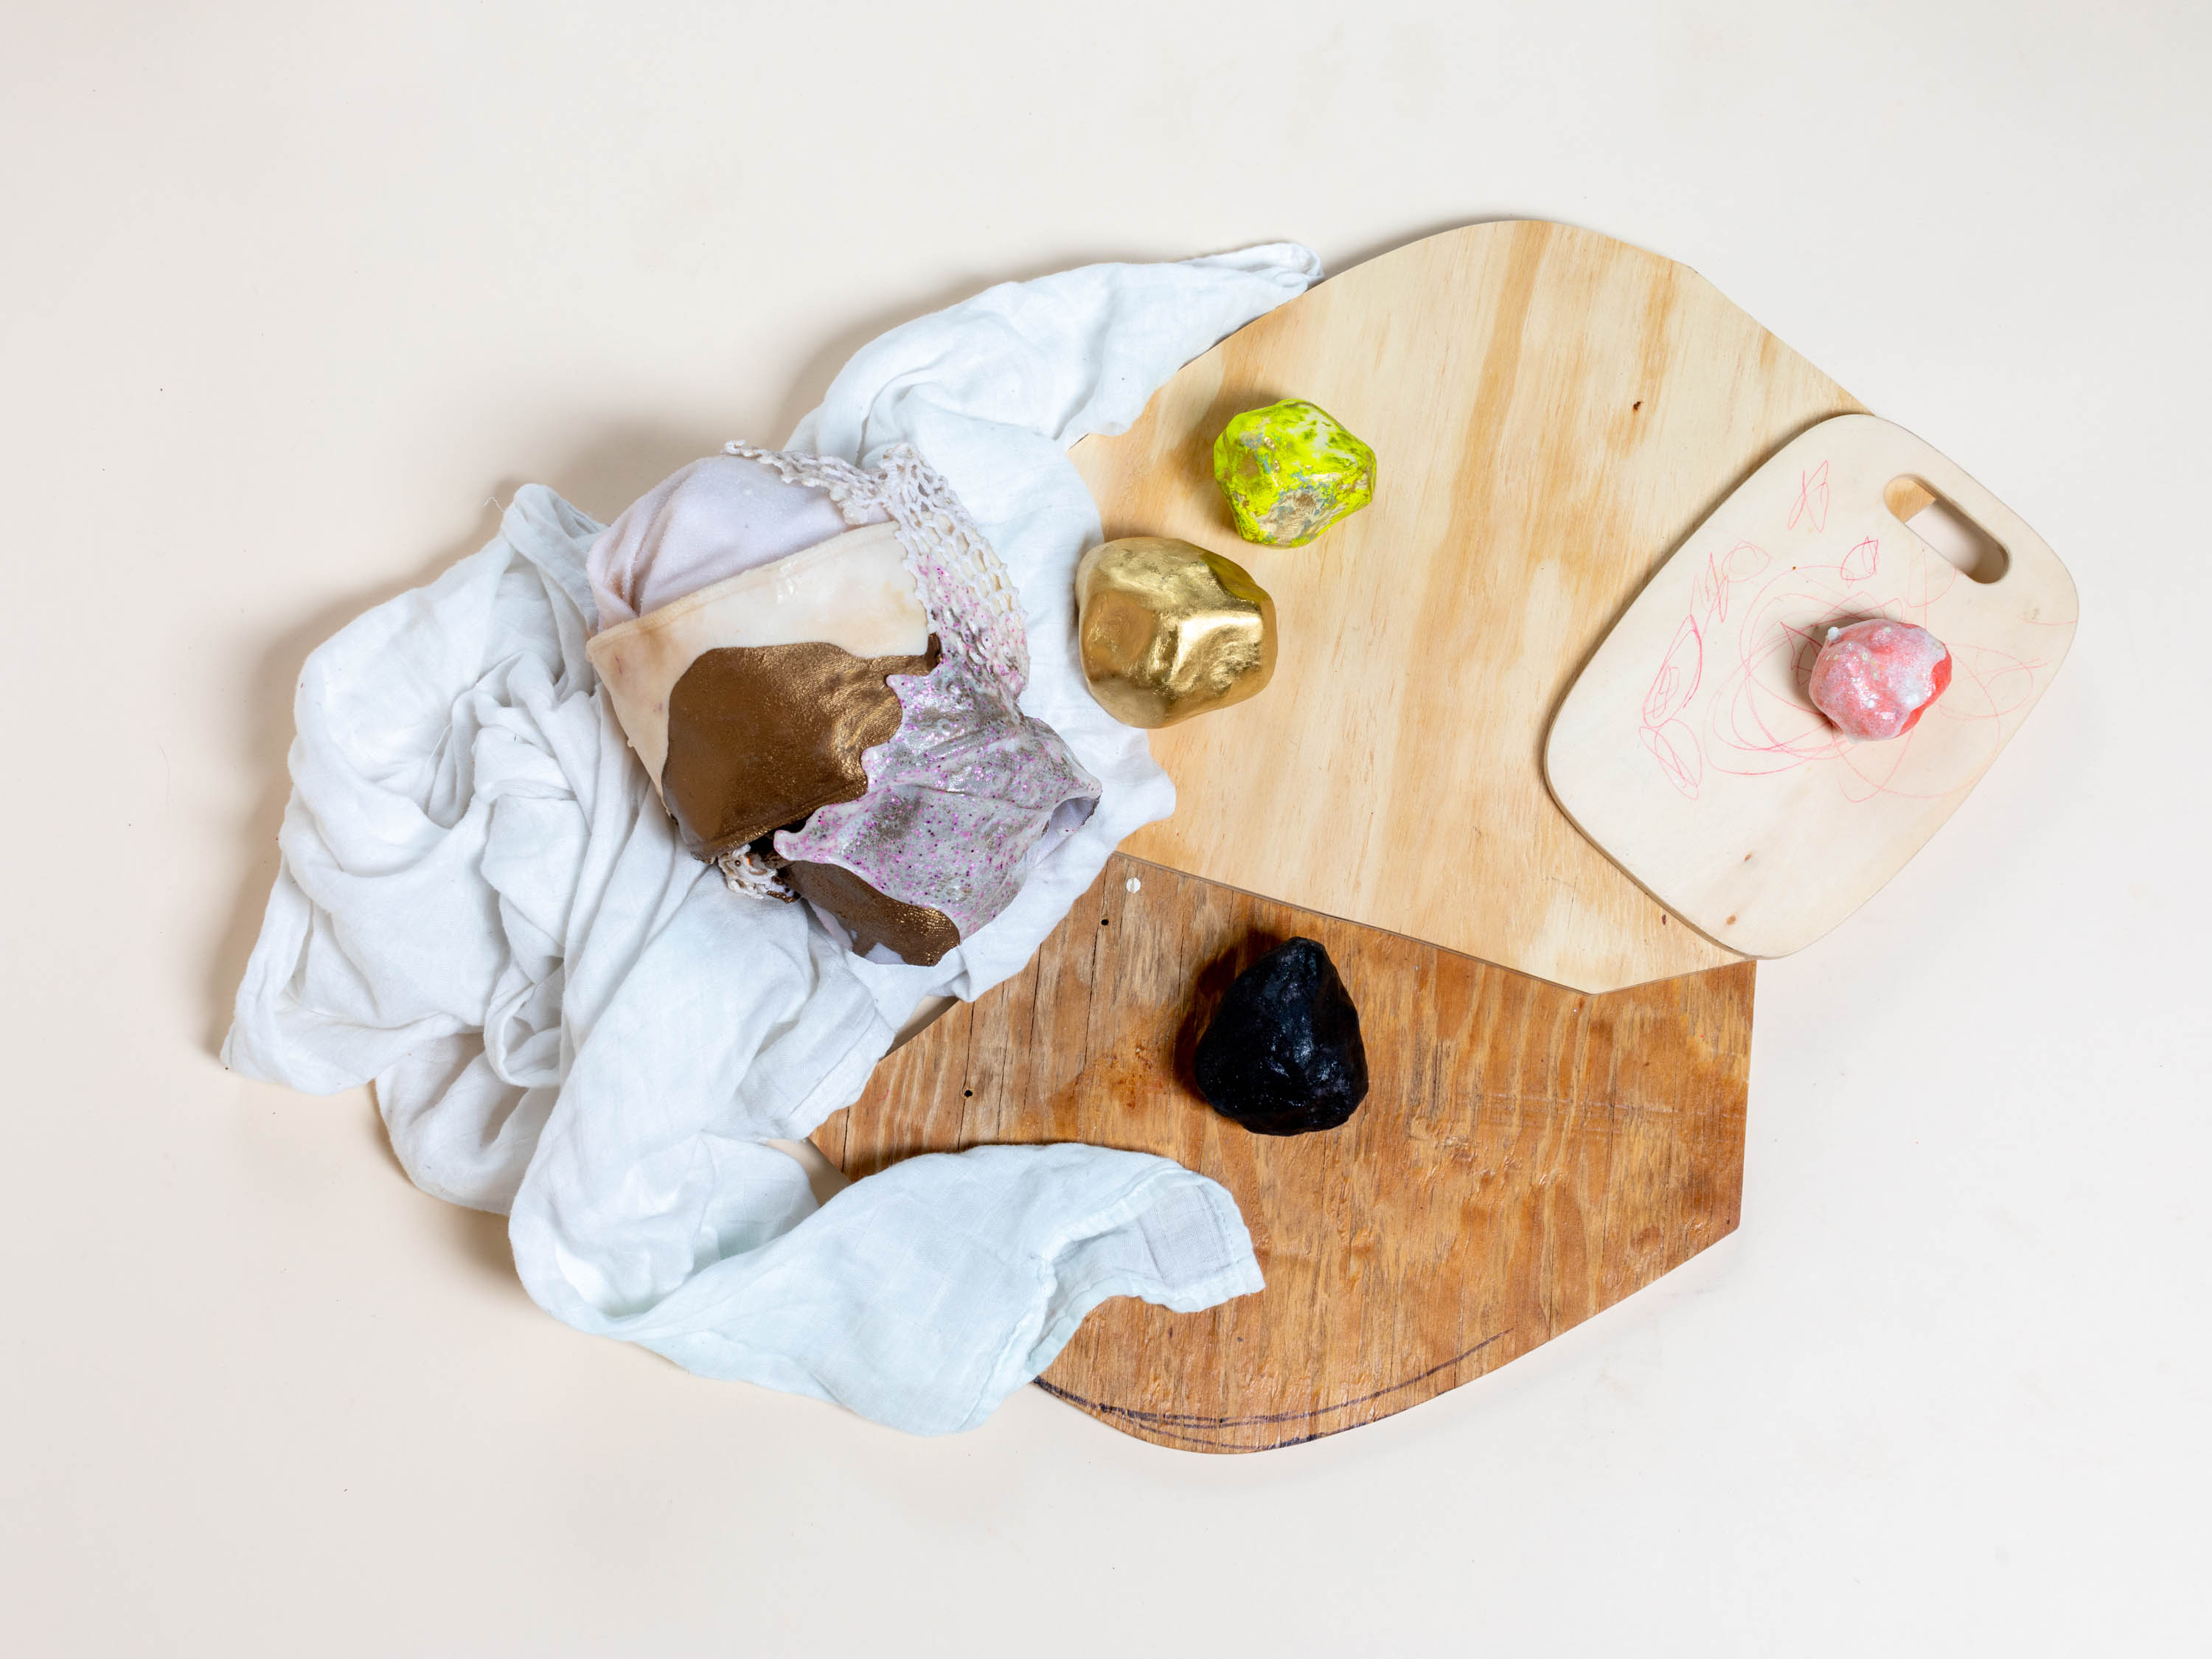 An assemblage consisting of wooden pieces, a cloth, and painted stones. The stones are painted in black, golden, and yellow. The objects are arranged on top of each other and the textures juxtapose each other.